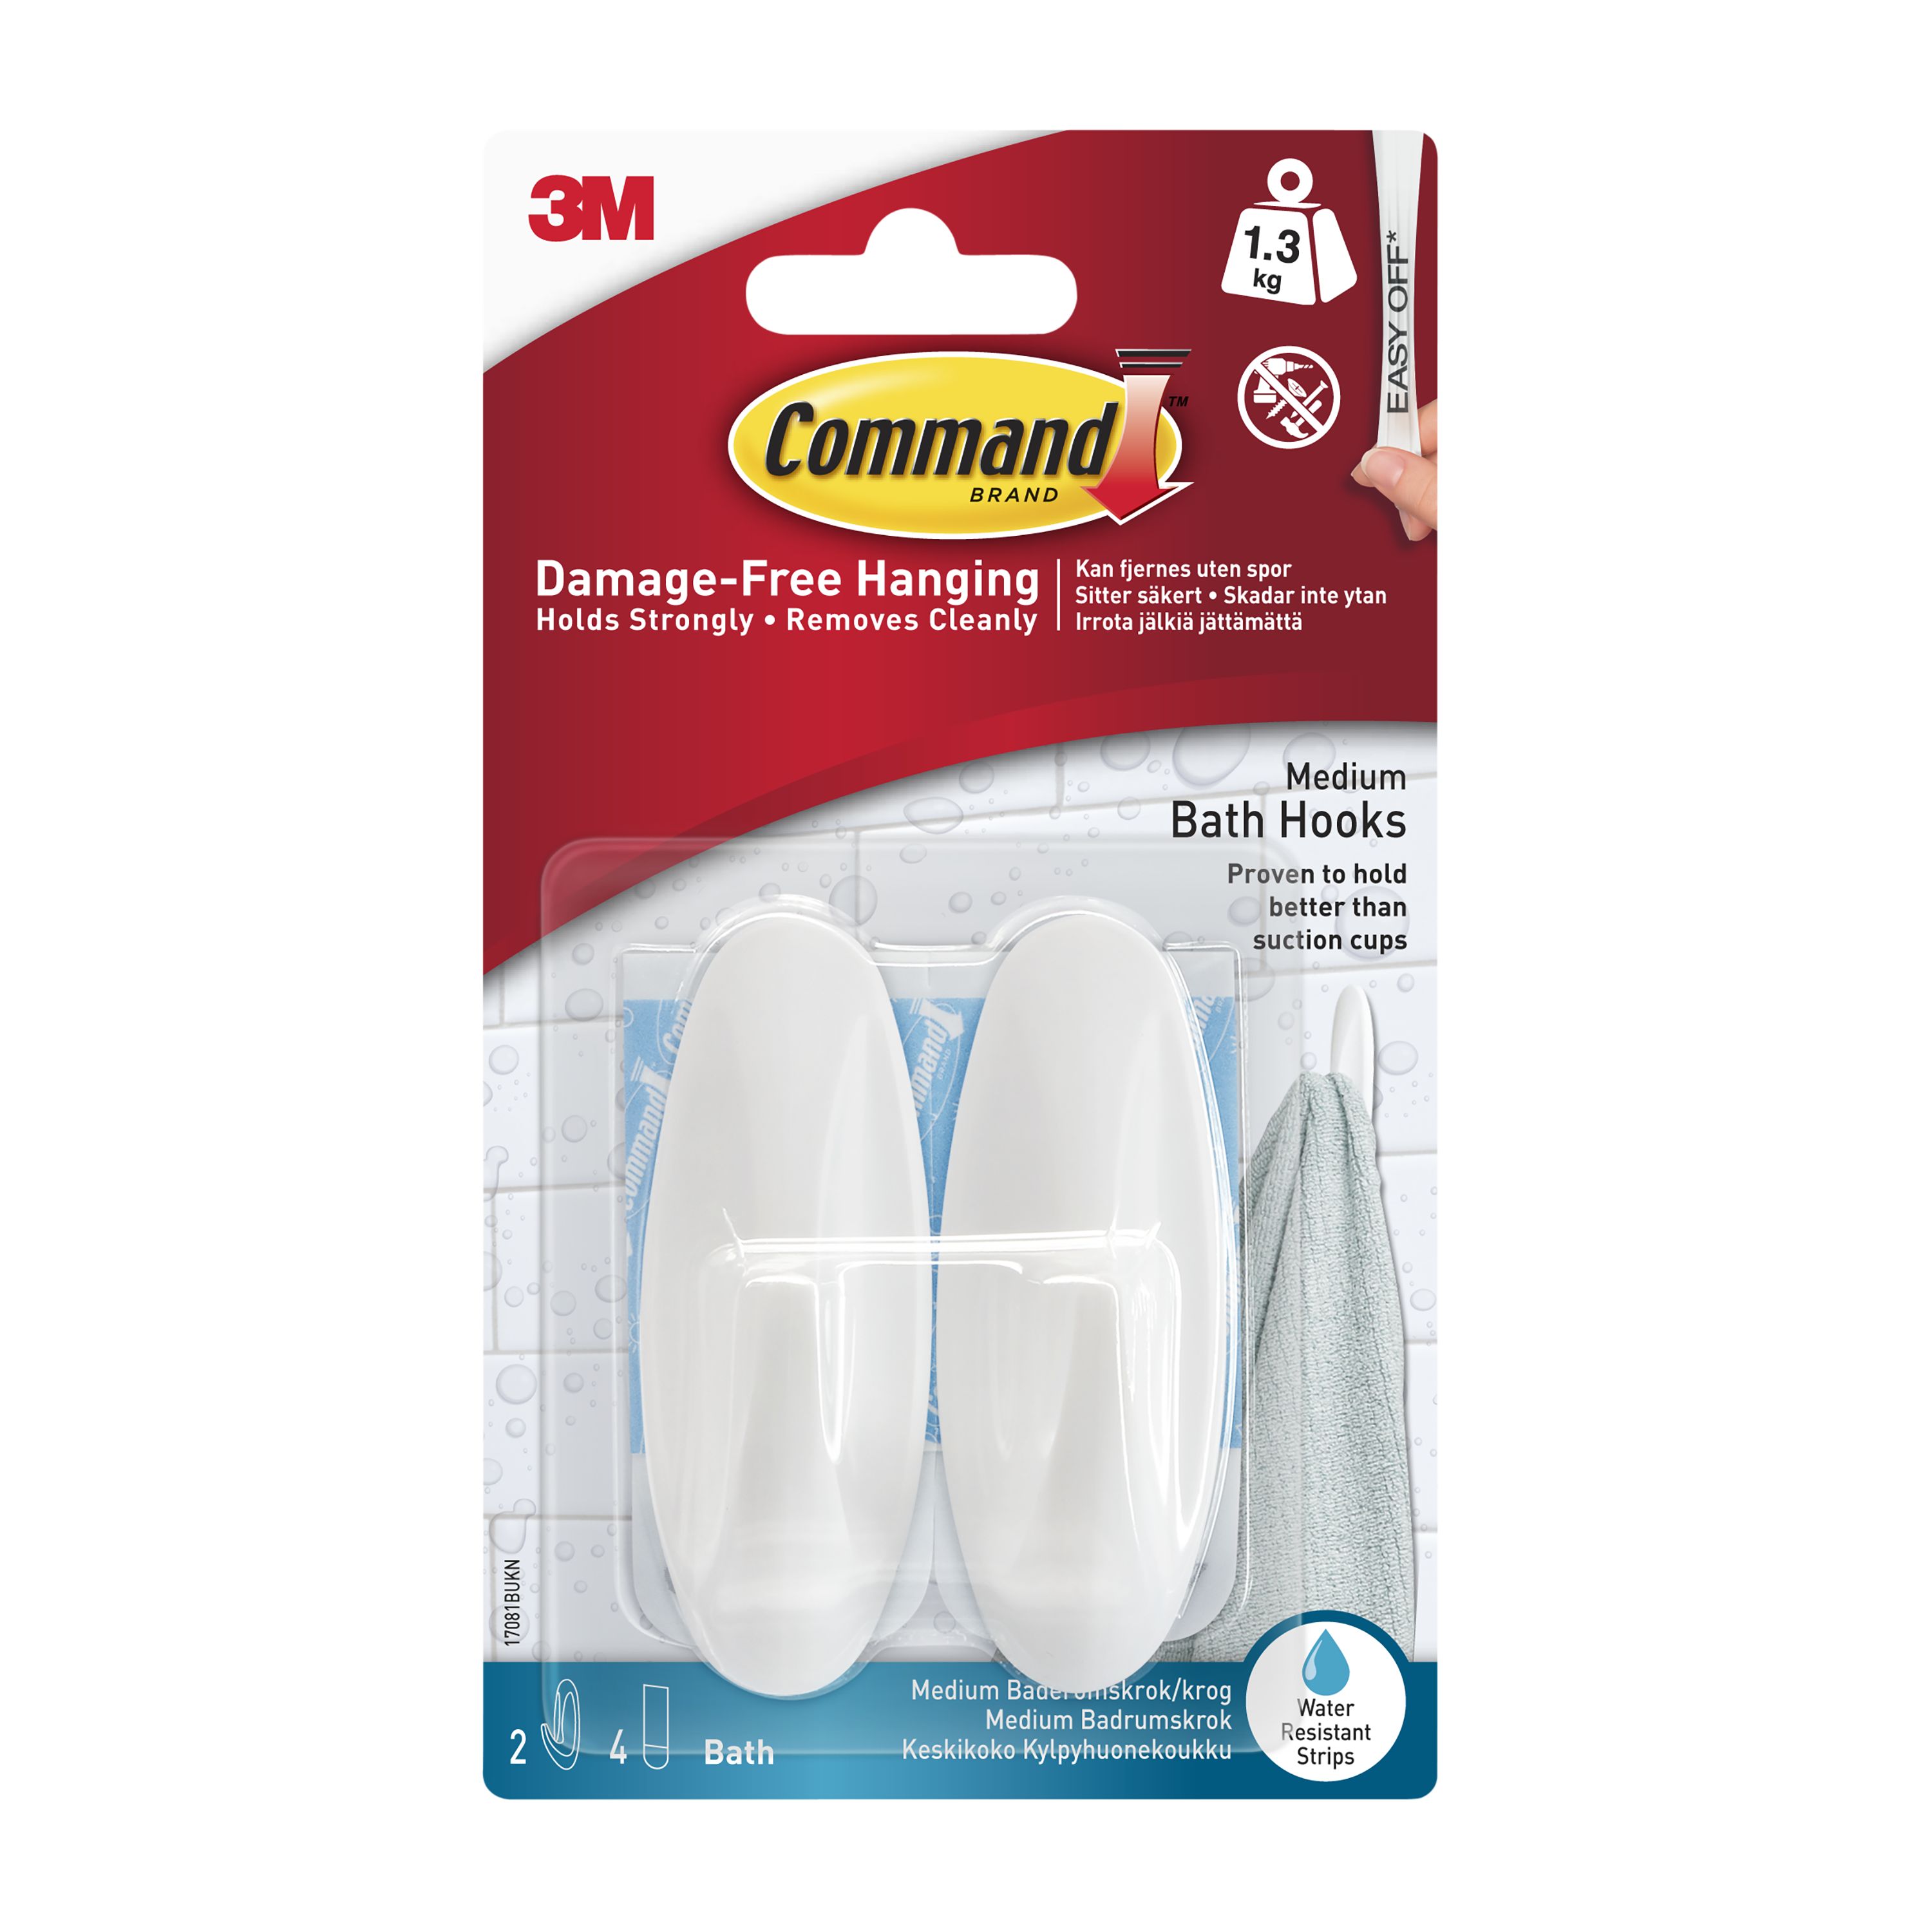 3M Command Small Single Clear Wire hook (Holds)0.23kg, Pack of 5